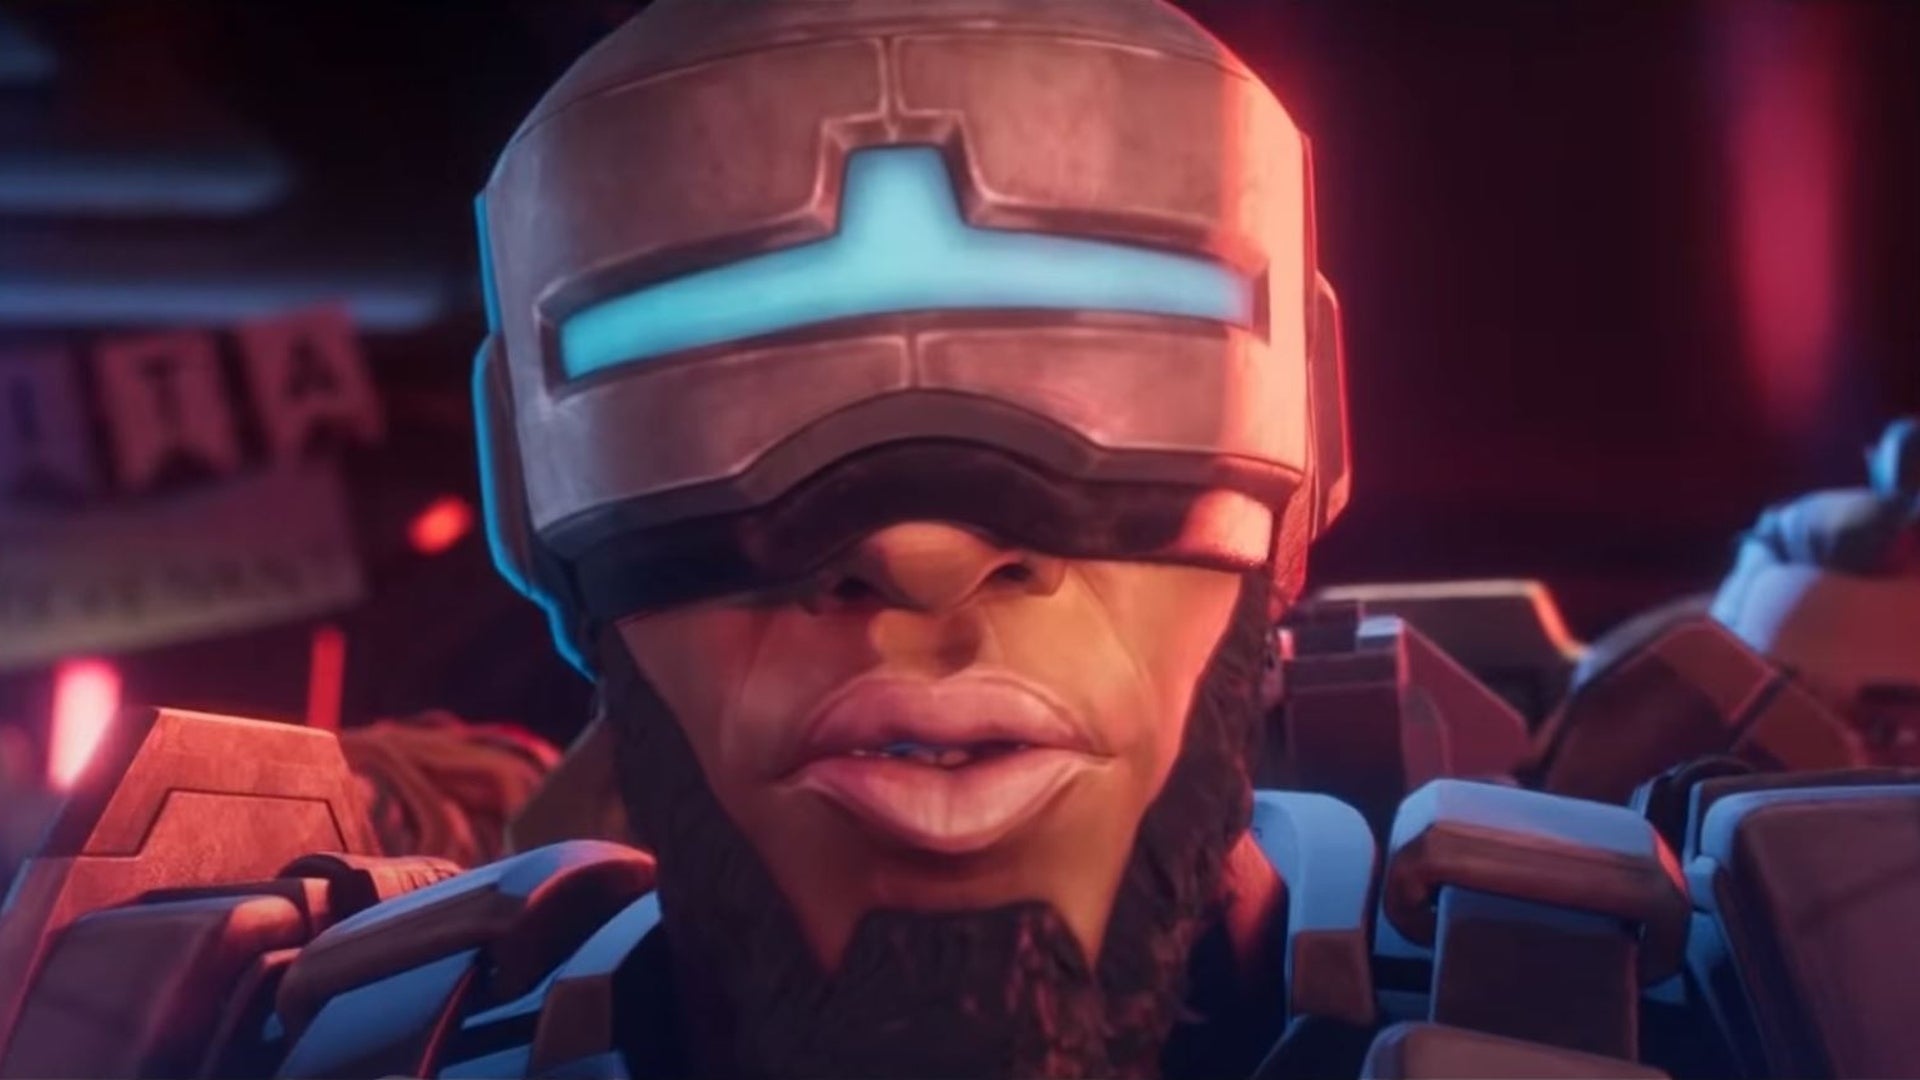 Apex Legends Season 13 introduces Bangalore's brother Newcastle, also known as Jackson Williams